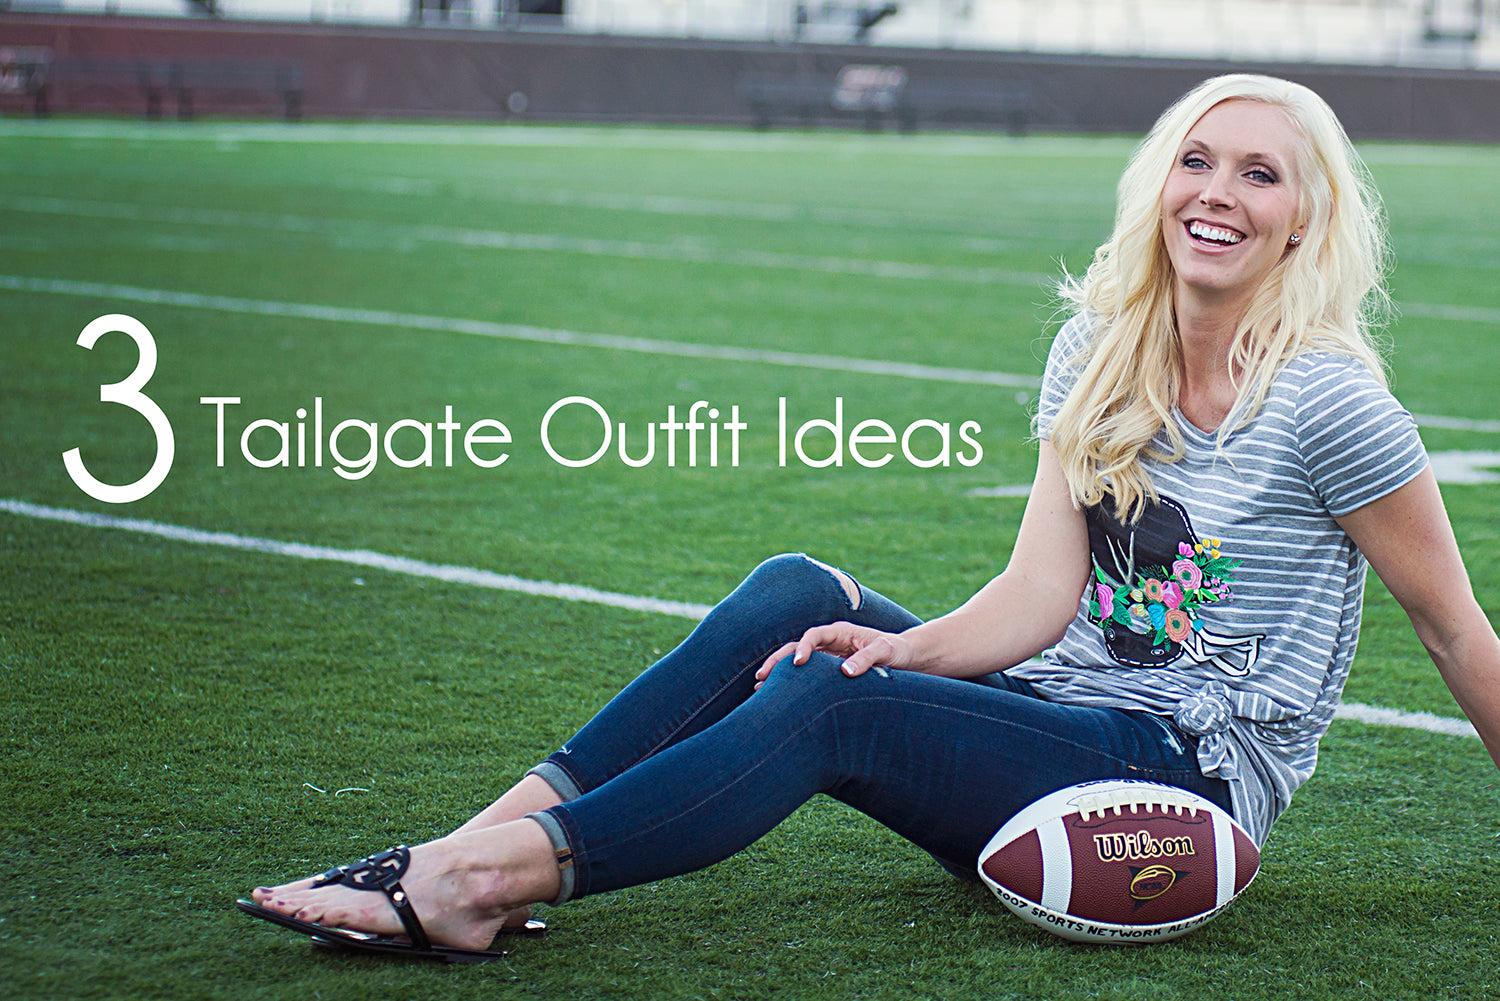 3 Trendy Tailgate Outfit Ideas for College Football Game at Eccentrics Boutique